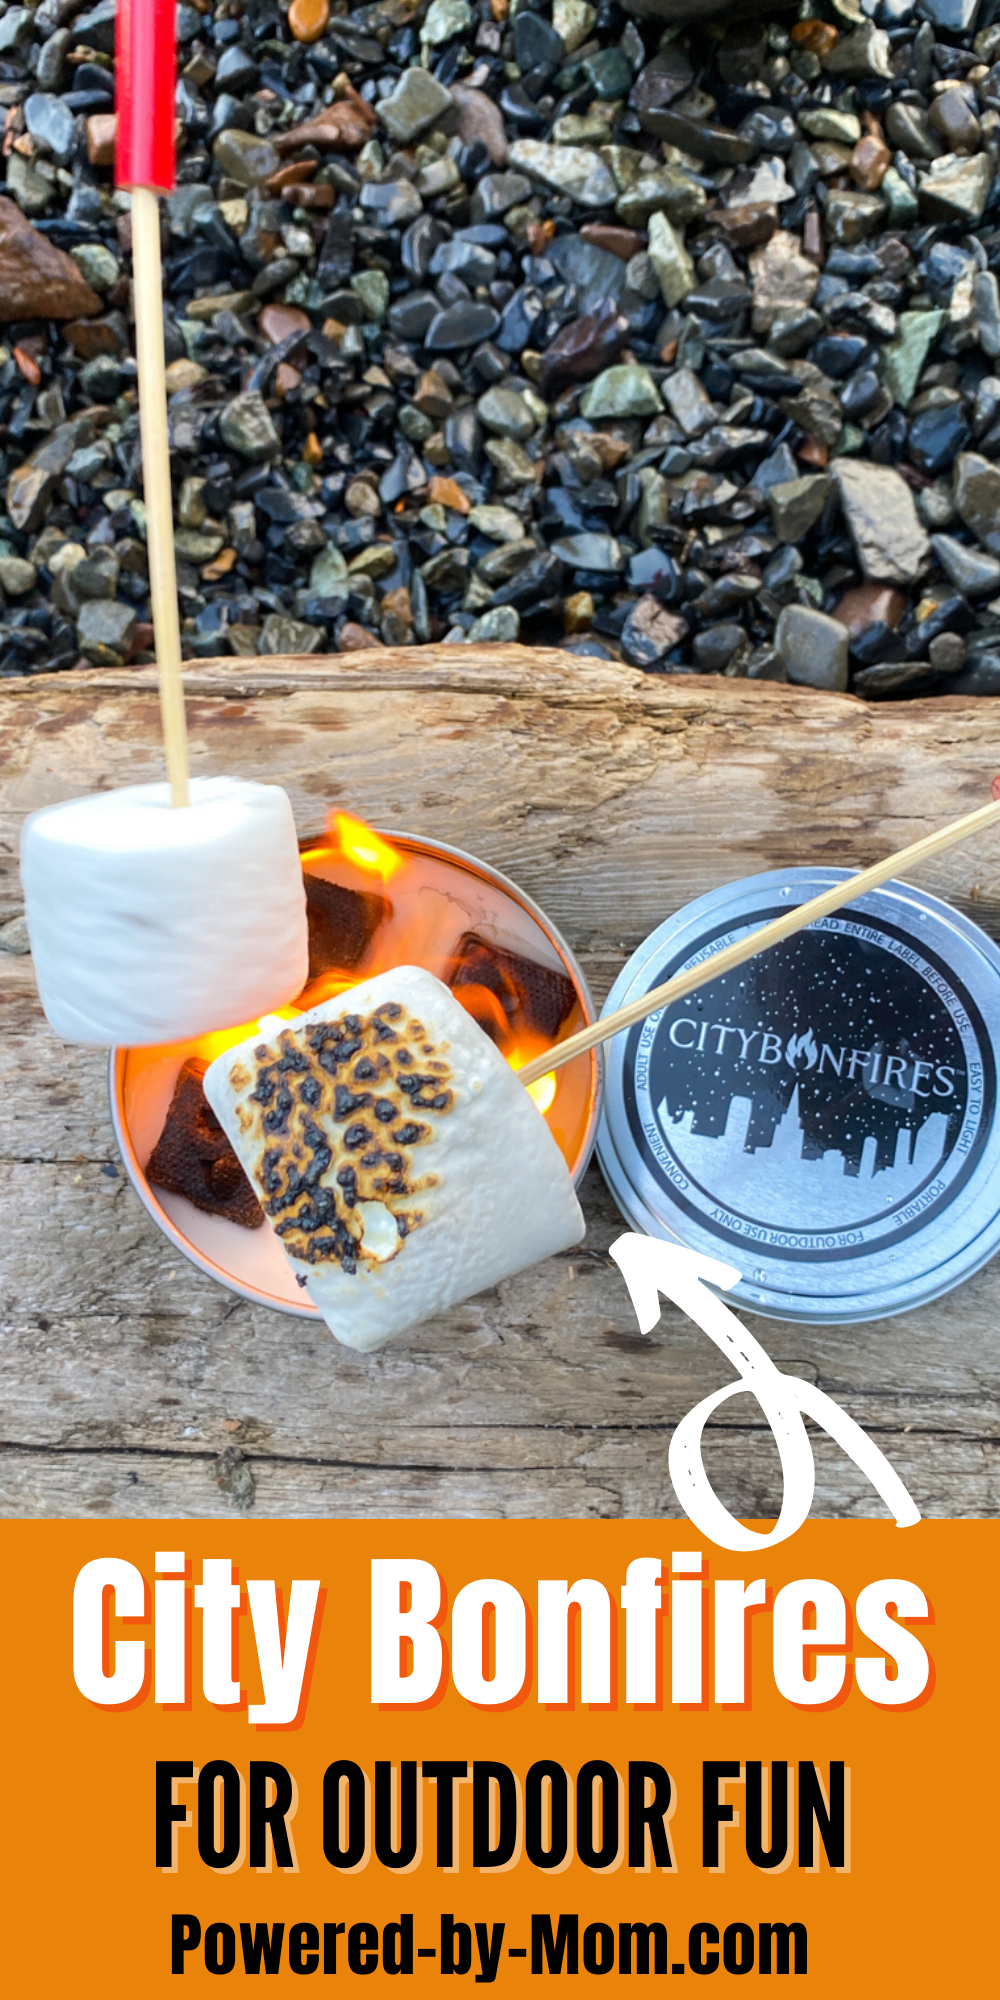 Enjoy a mini bonfire that you can roast marshmallows over almost anywhere thanks to City Bonfires! They are a great addition for your outdoor fun.